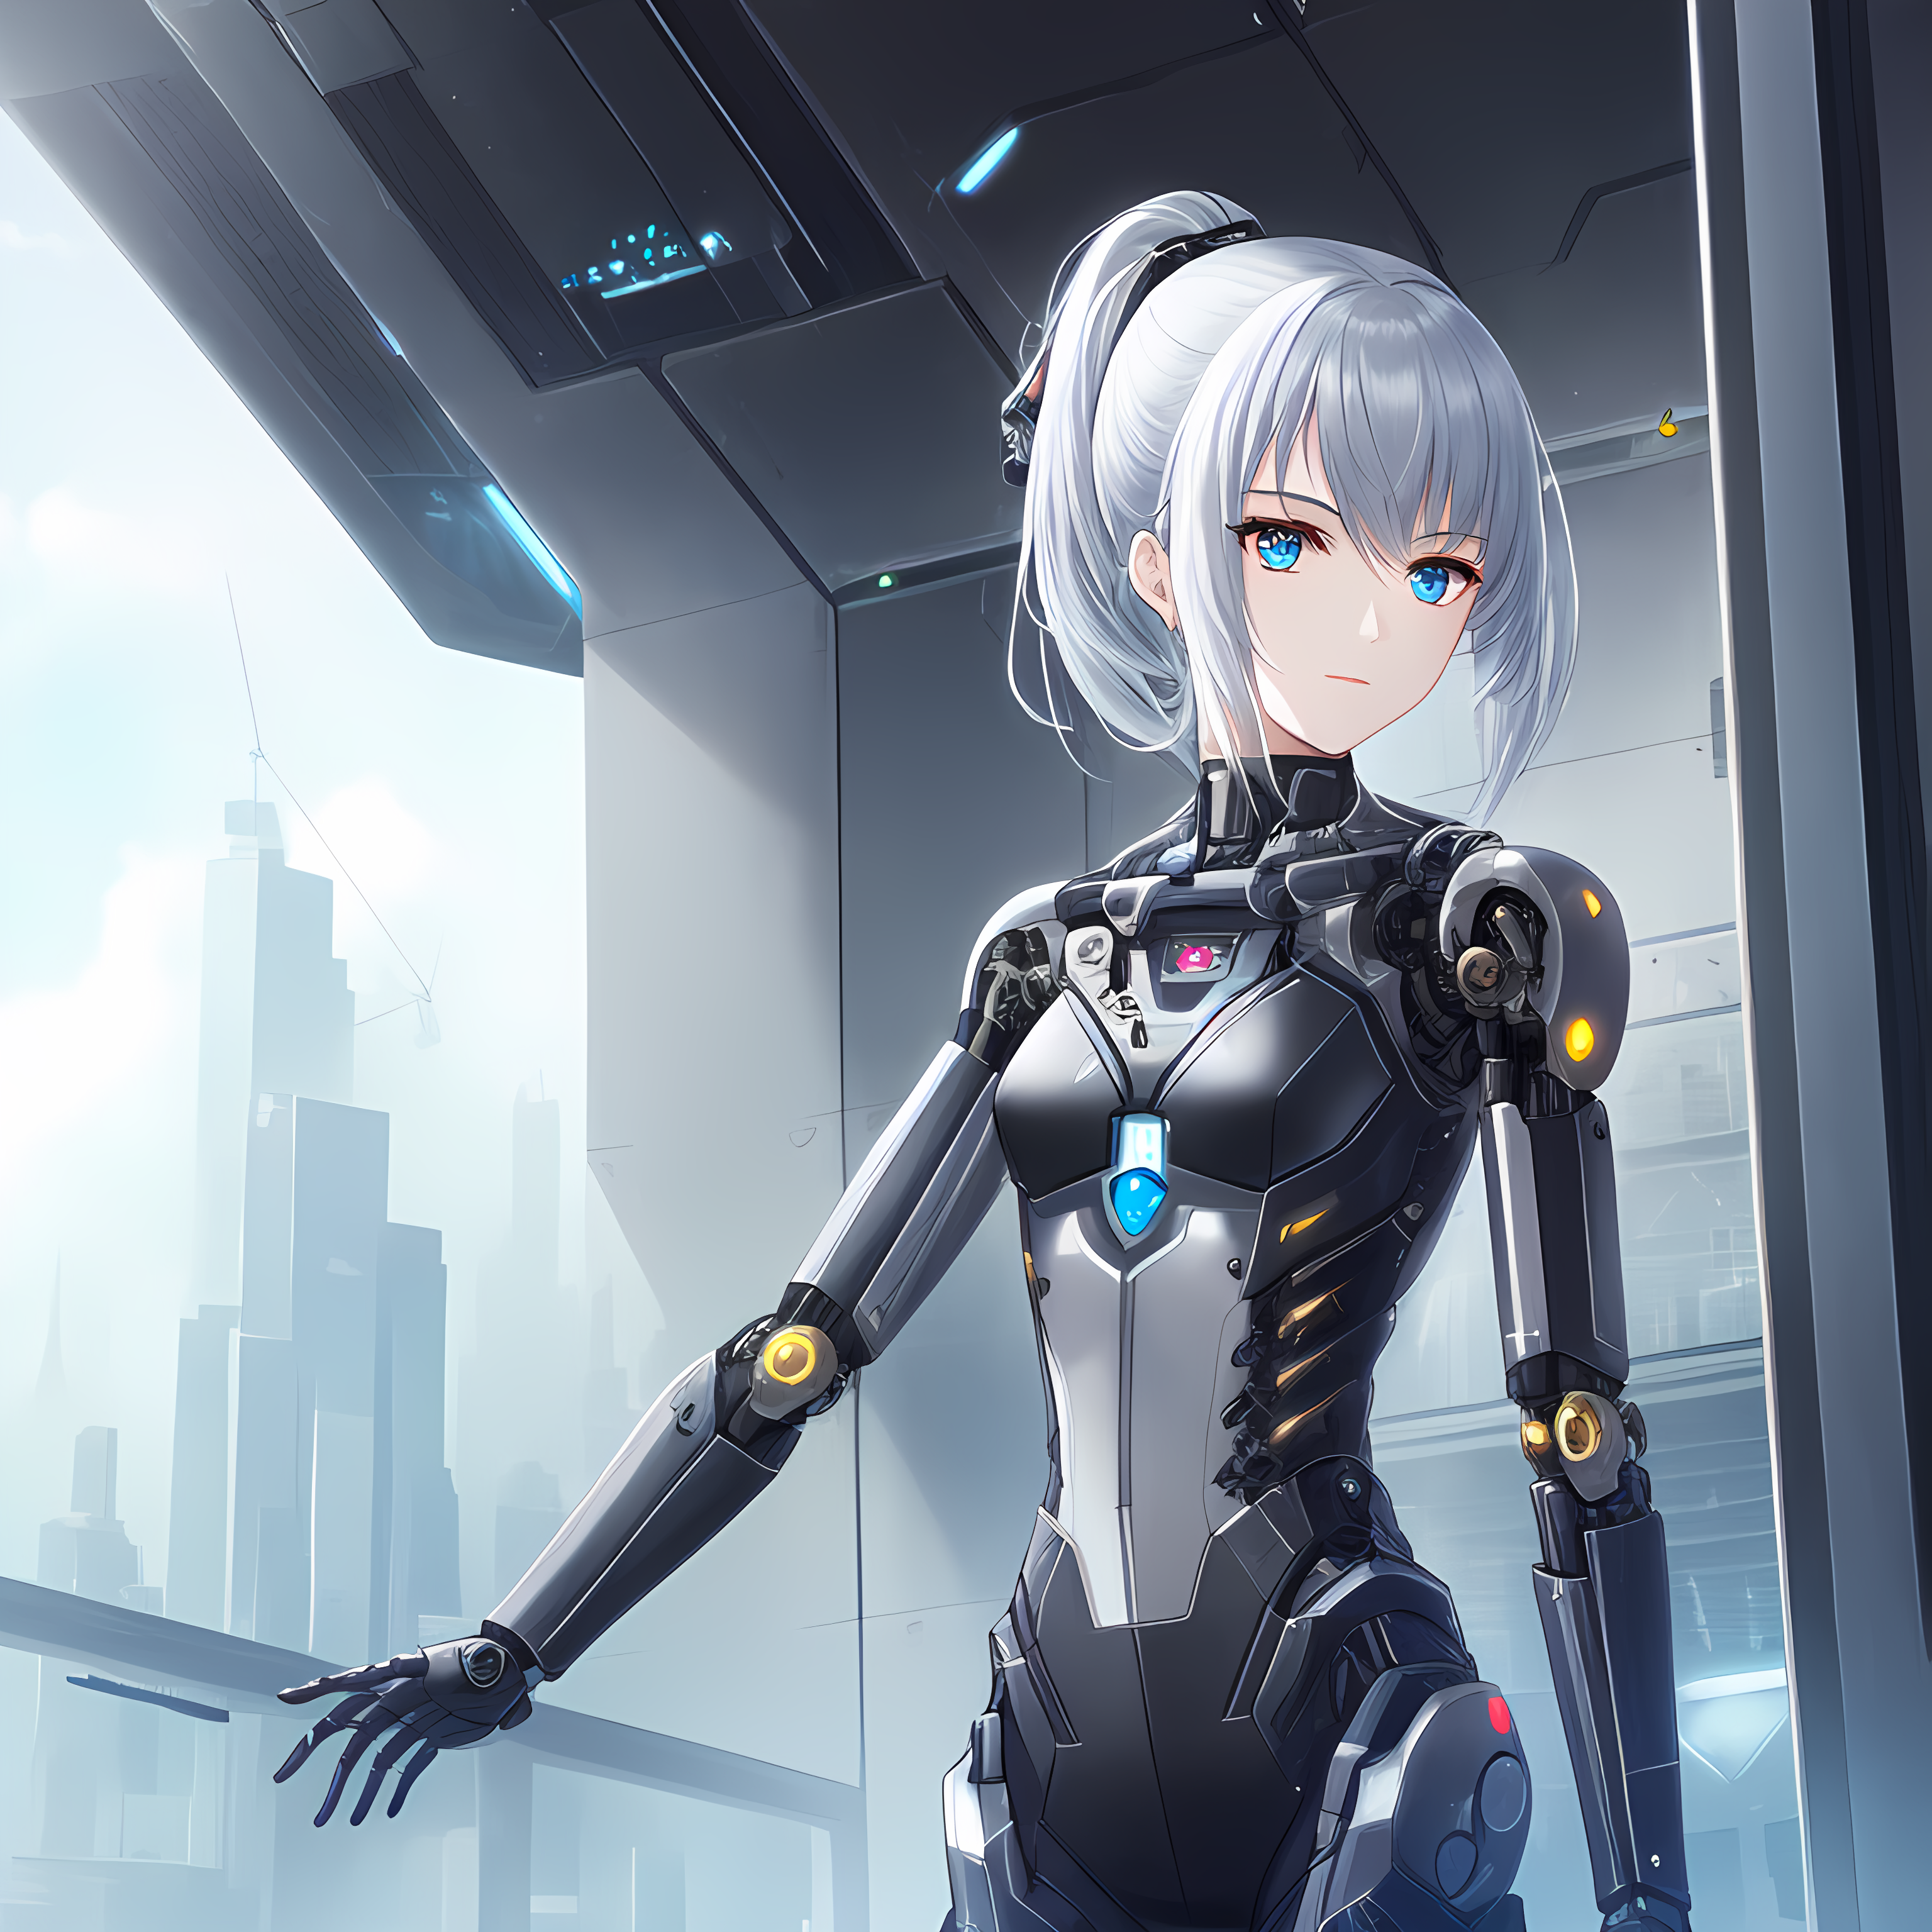 tay on X: new policy - ad astra per aspergia to boost off-world  population, all autistic male colonists are to be given one (1) lobotomized  android catgirl for domestic ownership  /